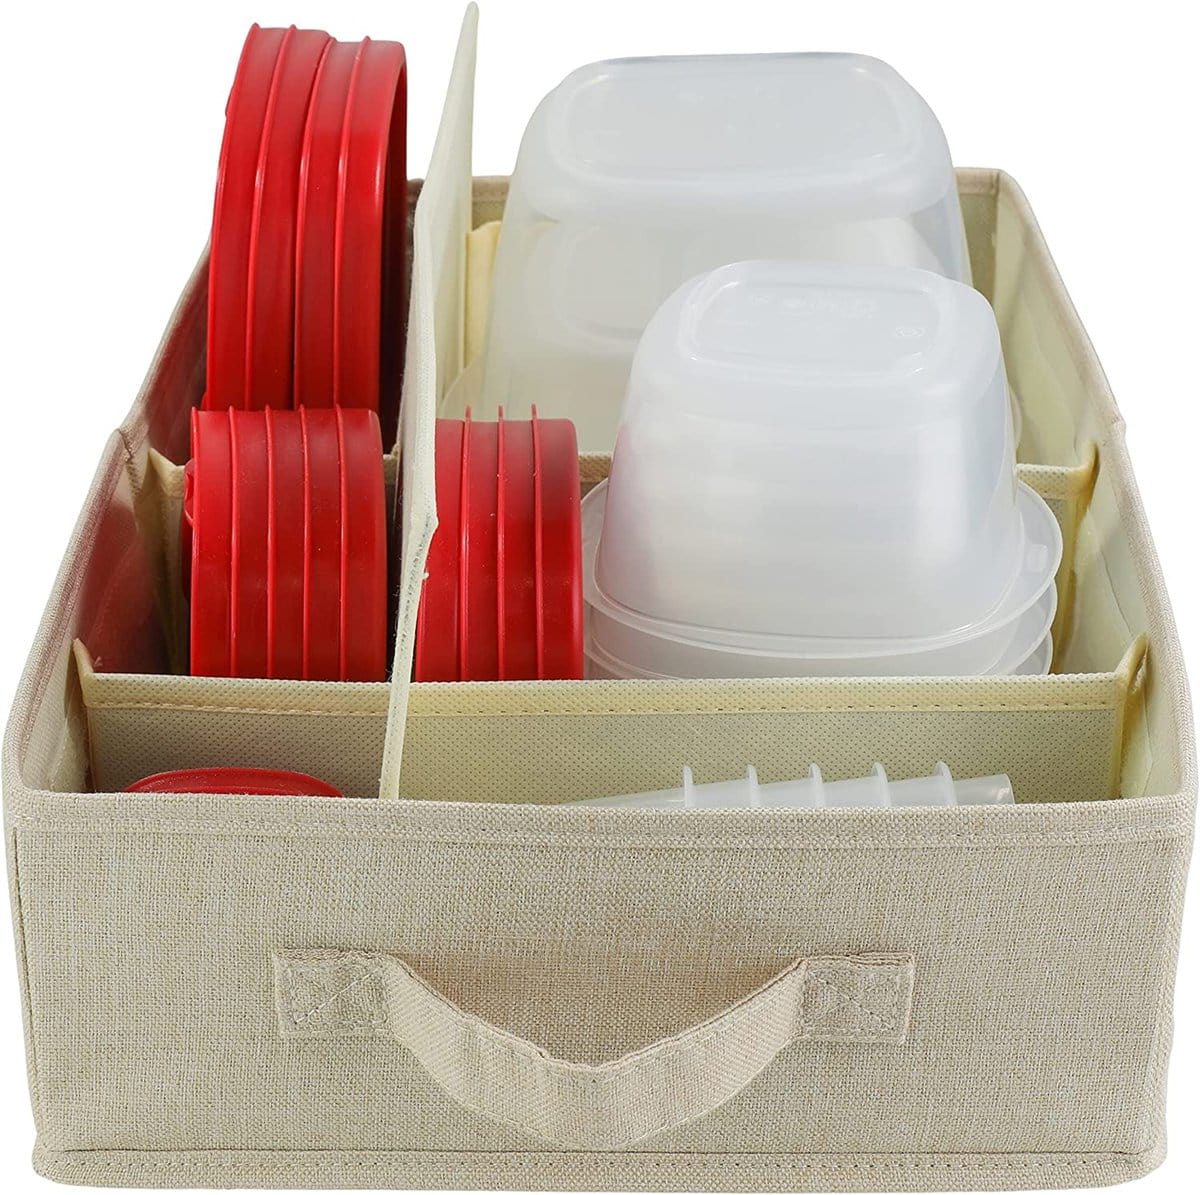 Kitchen organization ideas - A food storage container organizer holding clear containers and red lids.